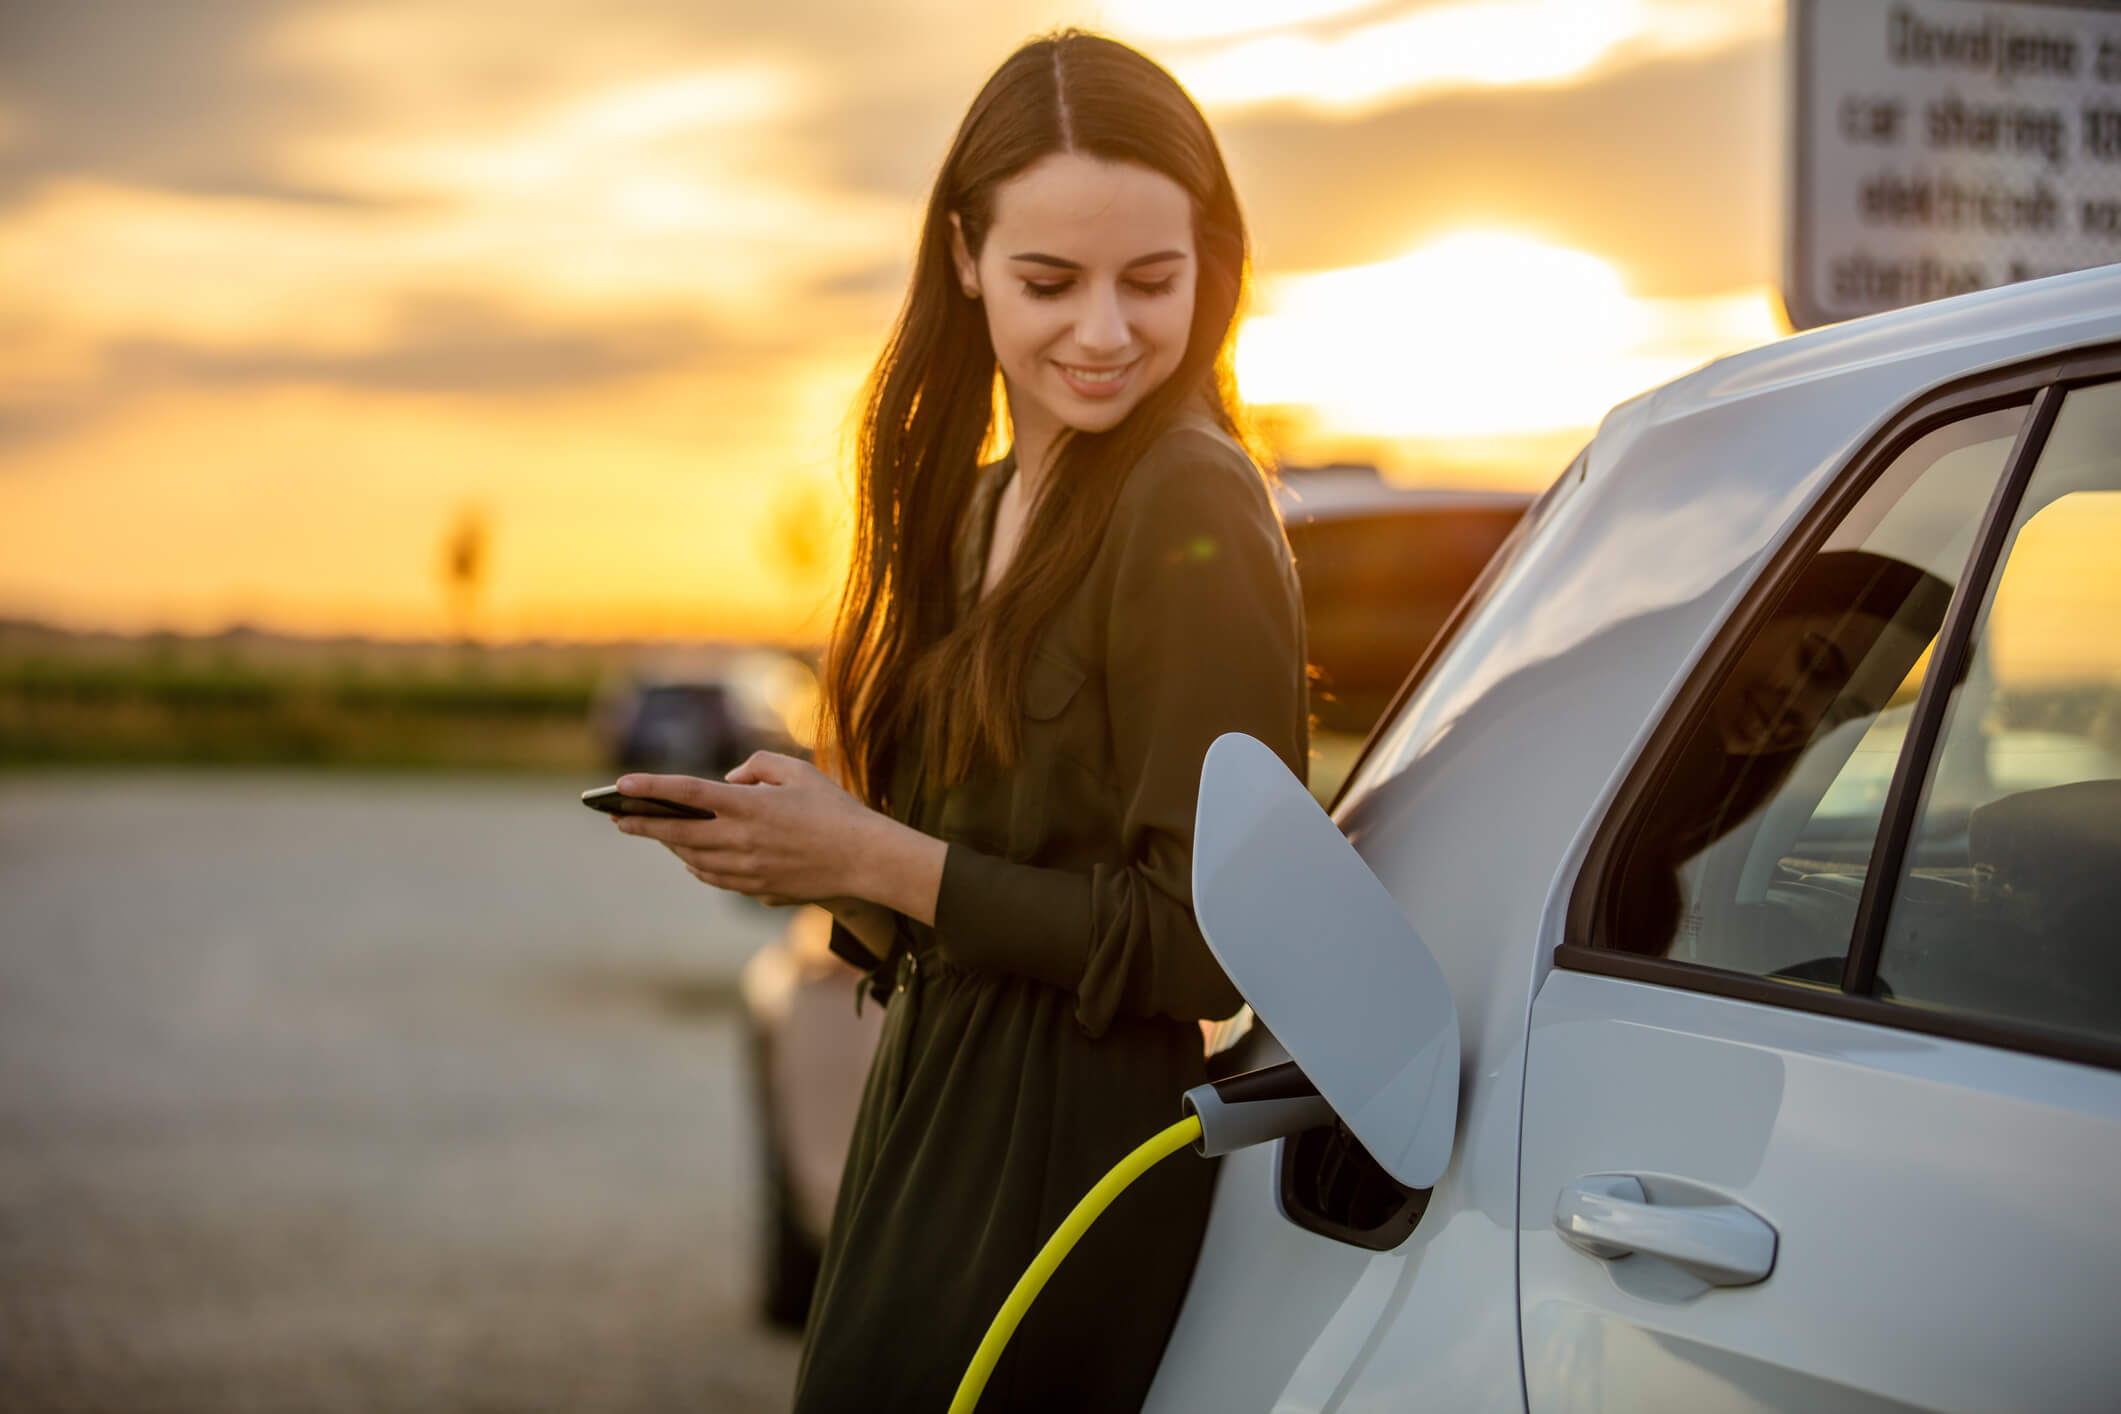 Smiling woman leaning on a charging car